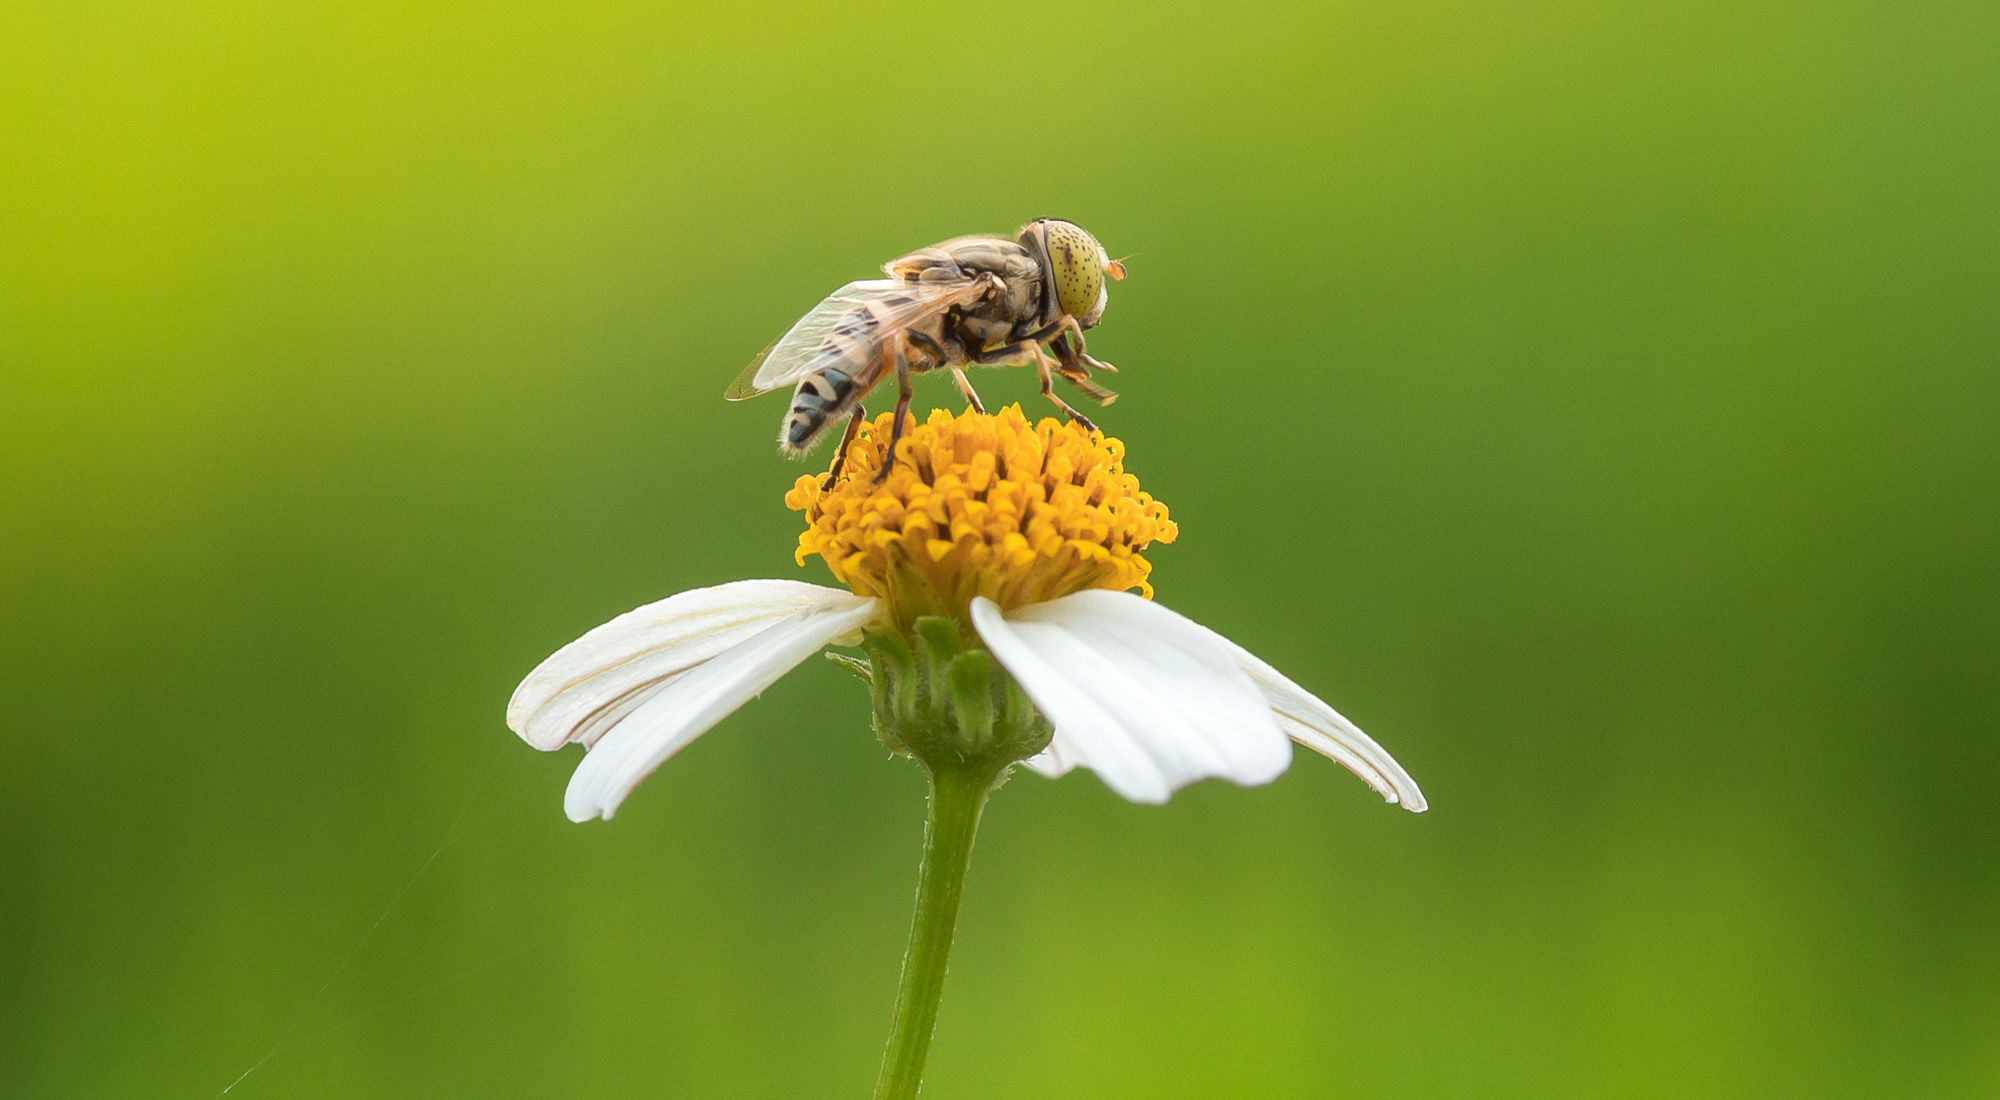 Meet our Hoverfly Experts – Interview with Andrea Aracil and Santos Rojo